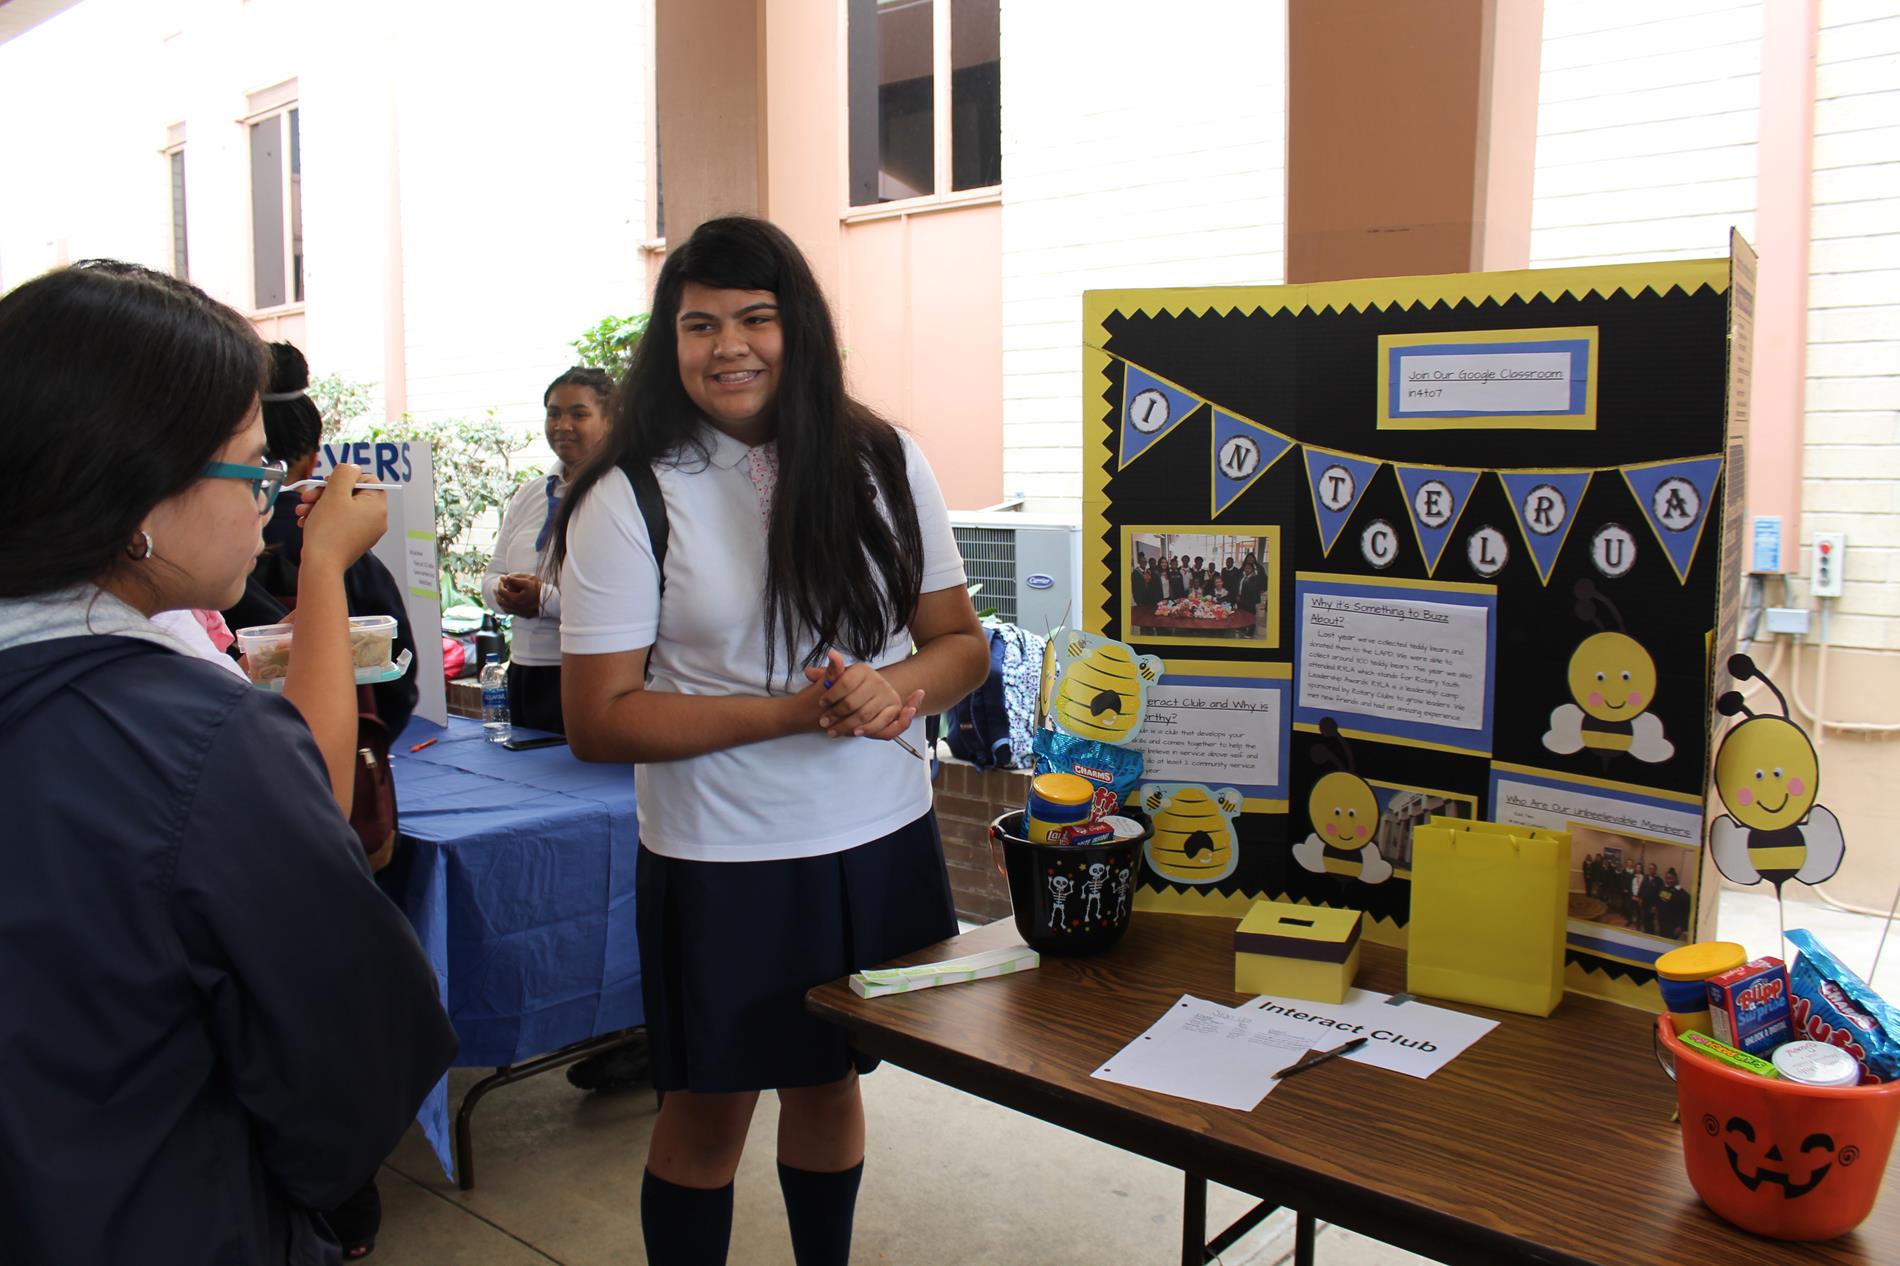 Student speaks about Interact Club